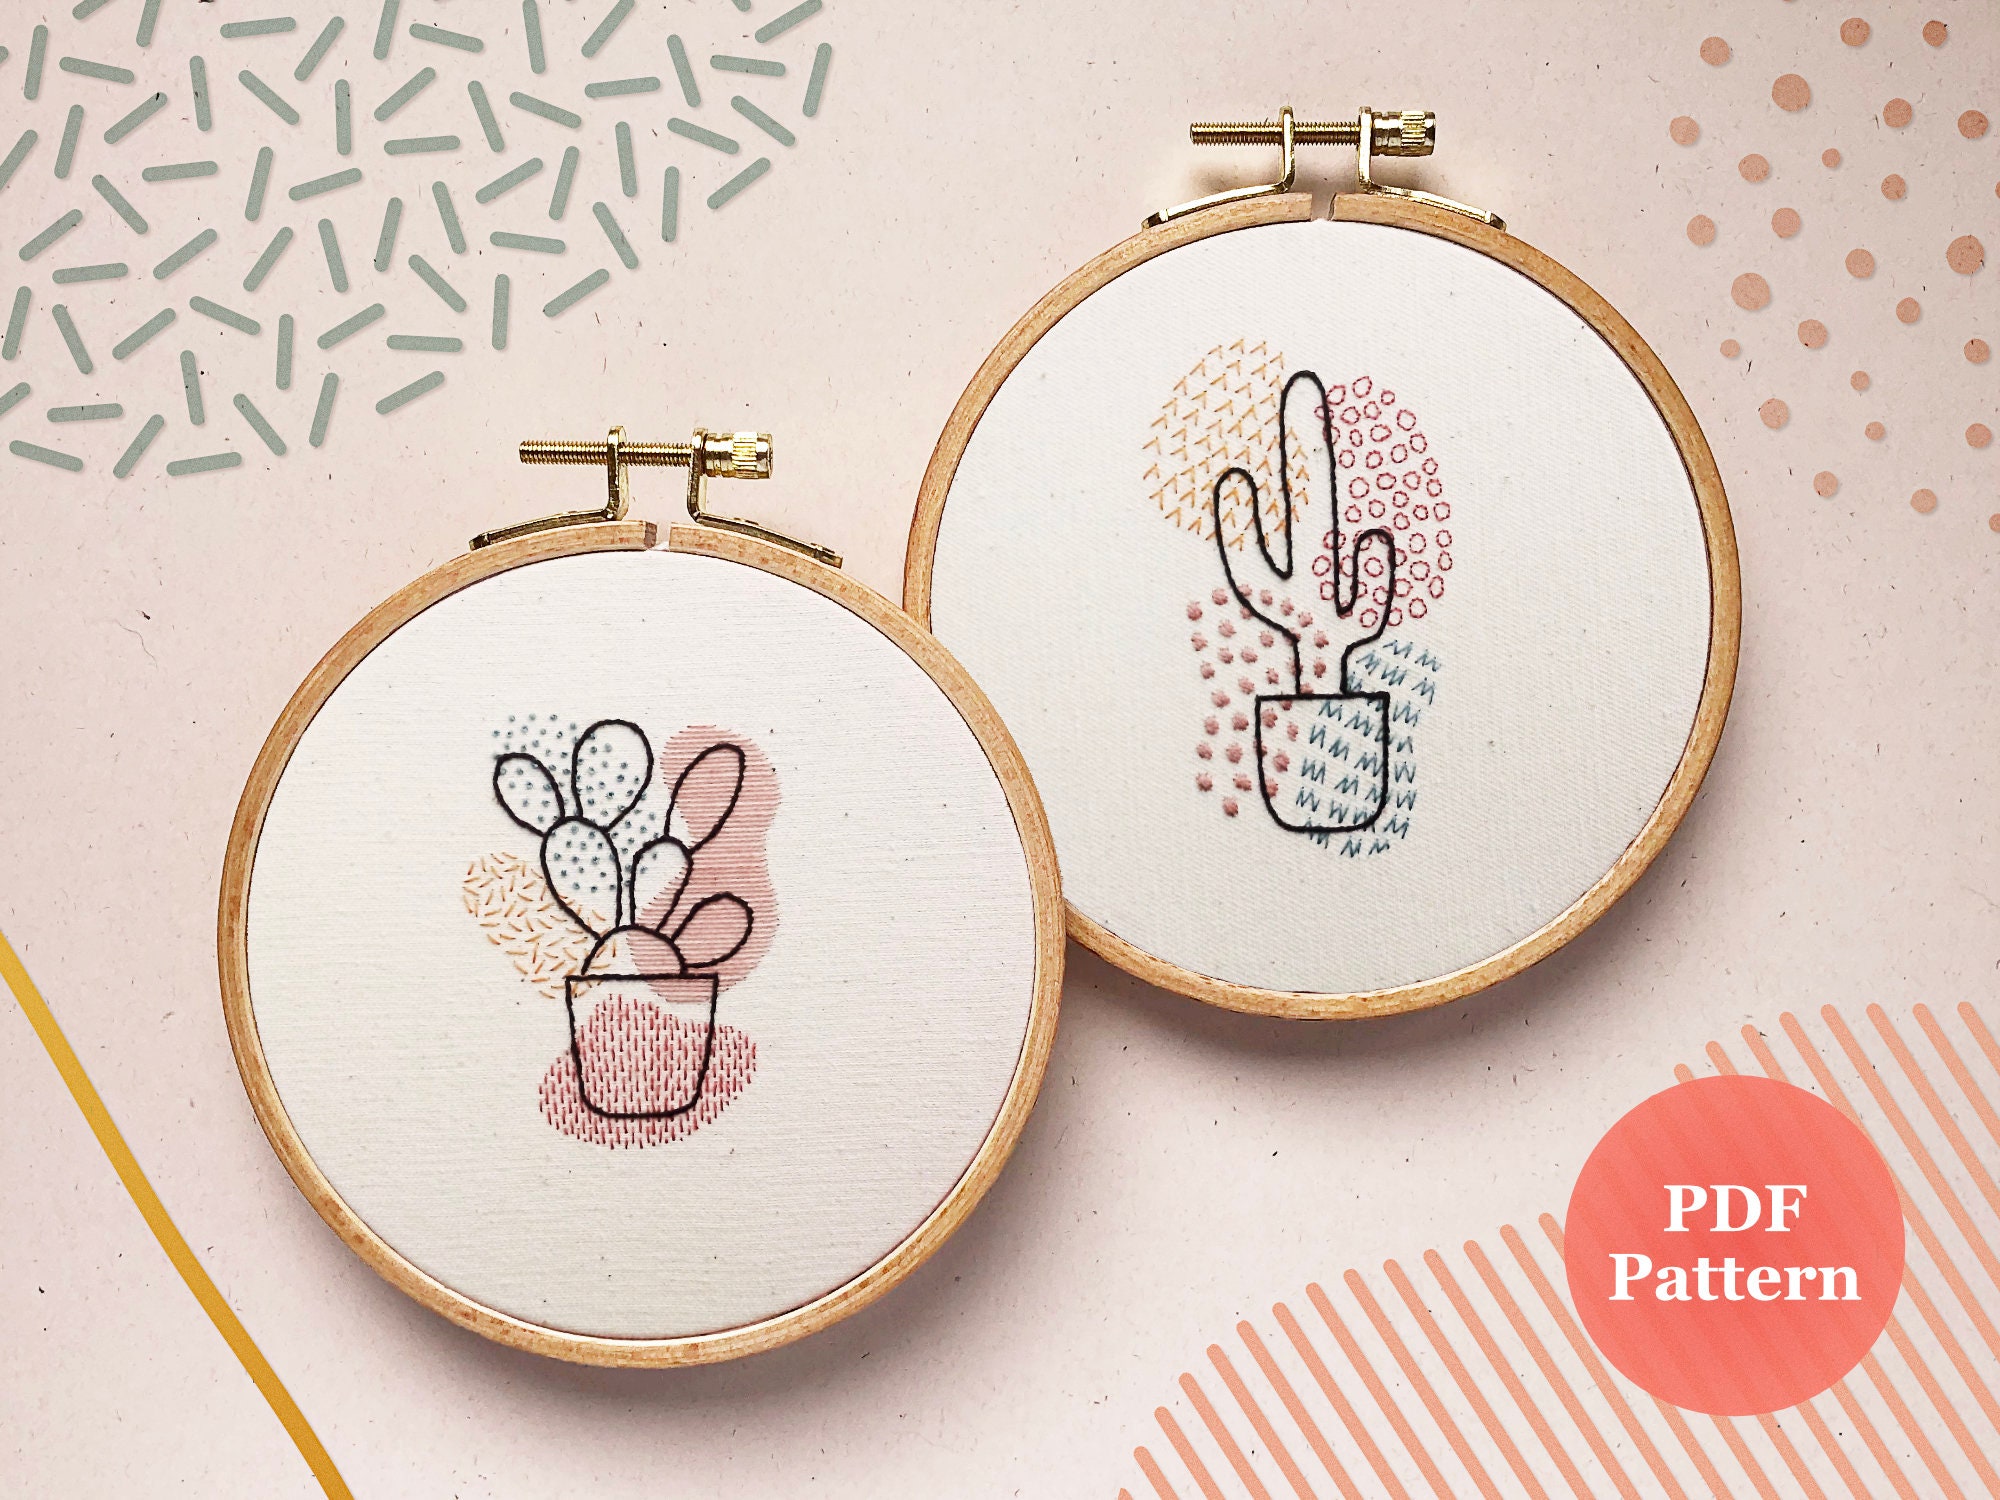 DIY Embroidery Kit for Beginners Review Cactus Designs 